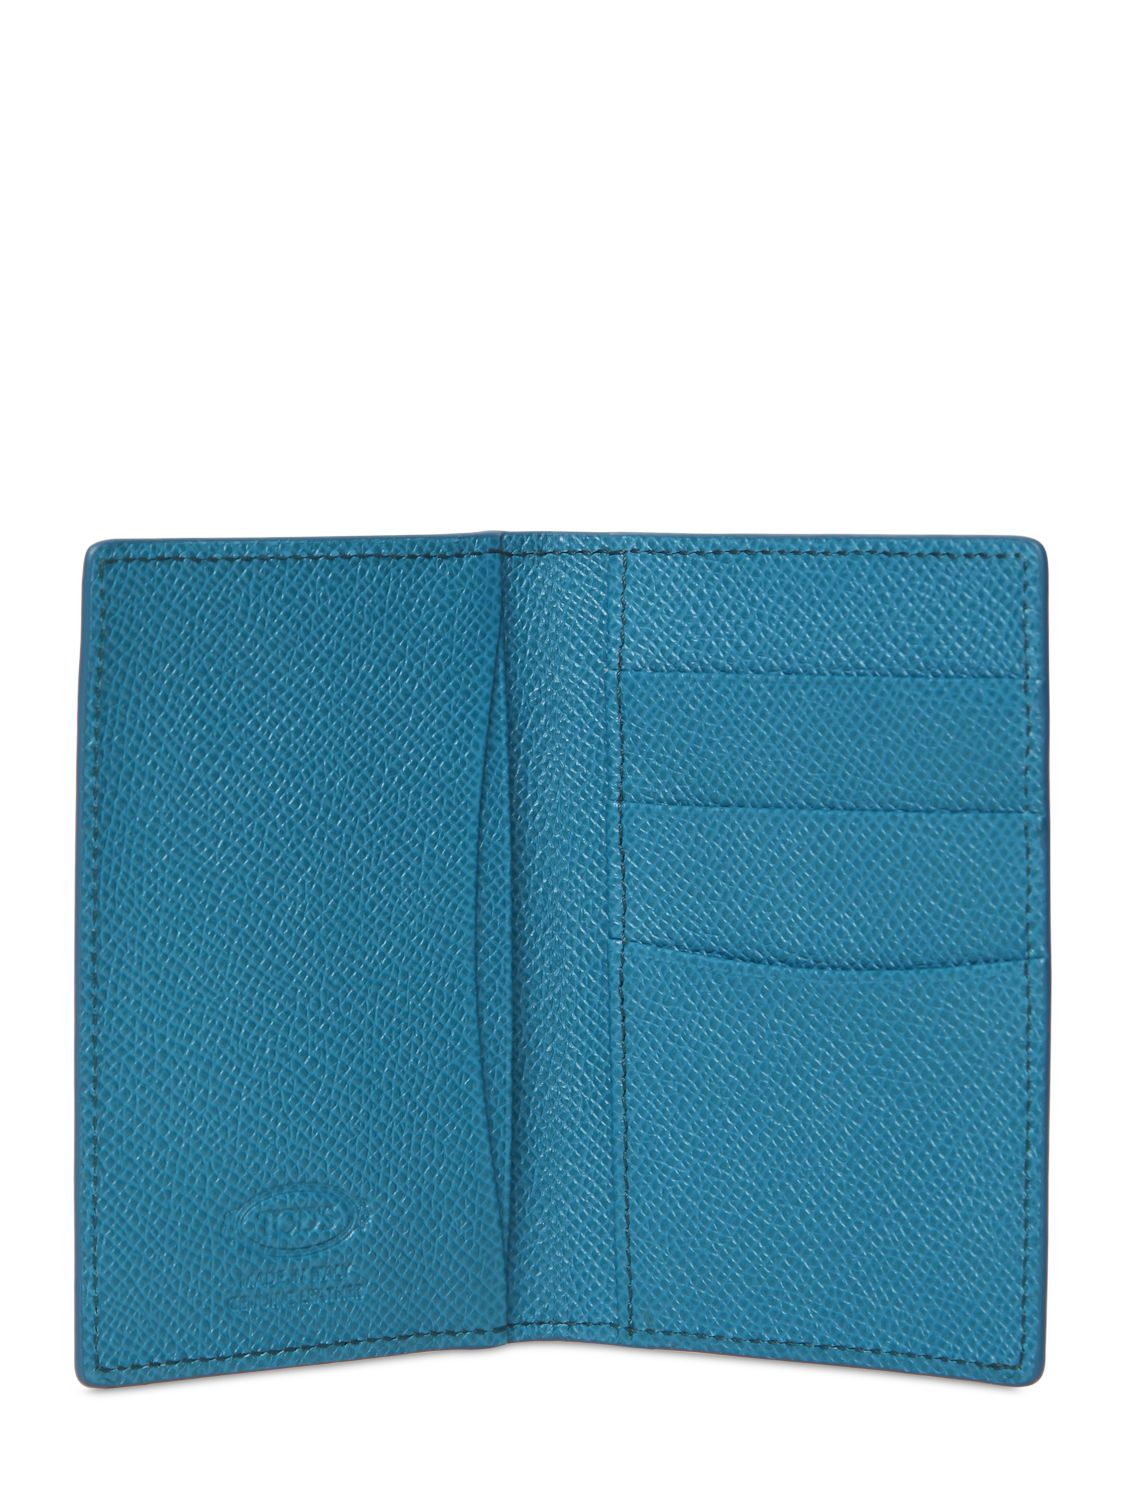 Name:  tods-blue-vertical-grained-leather-card-holder-product-1-16410734-2-403725095-normal.jpeg
Views: 747
Size:  631.9 KB